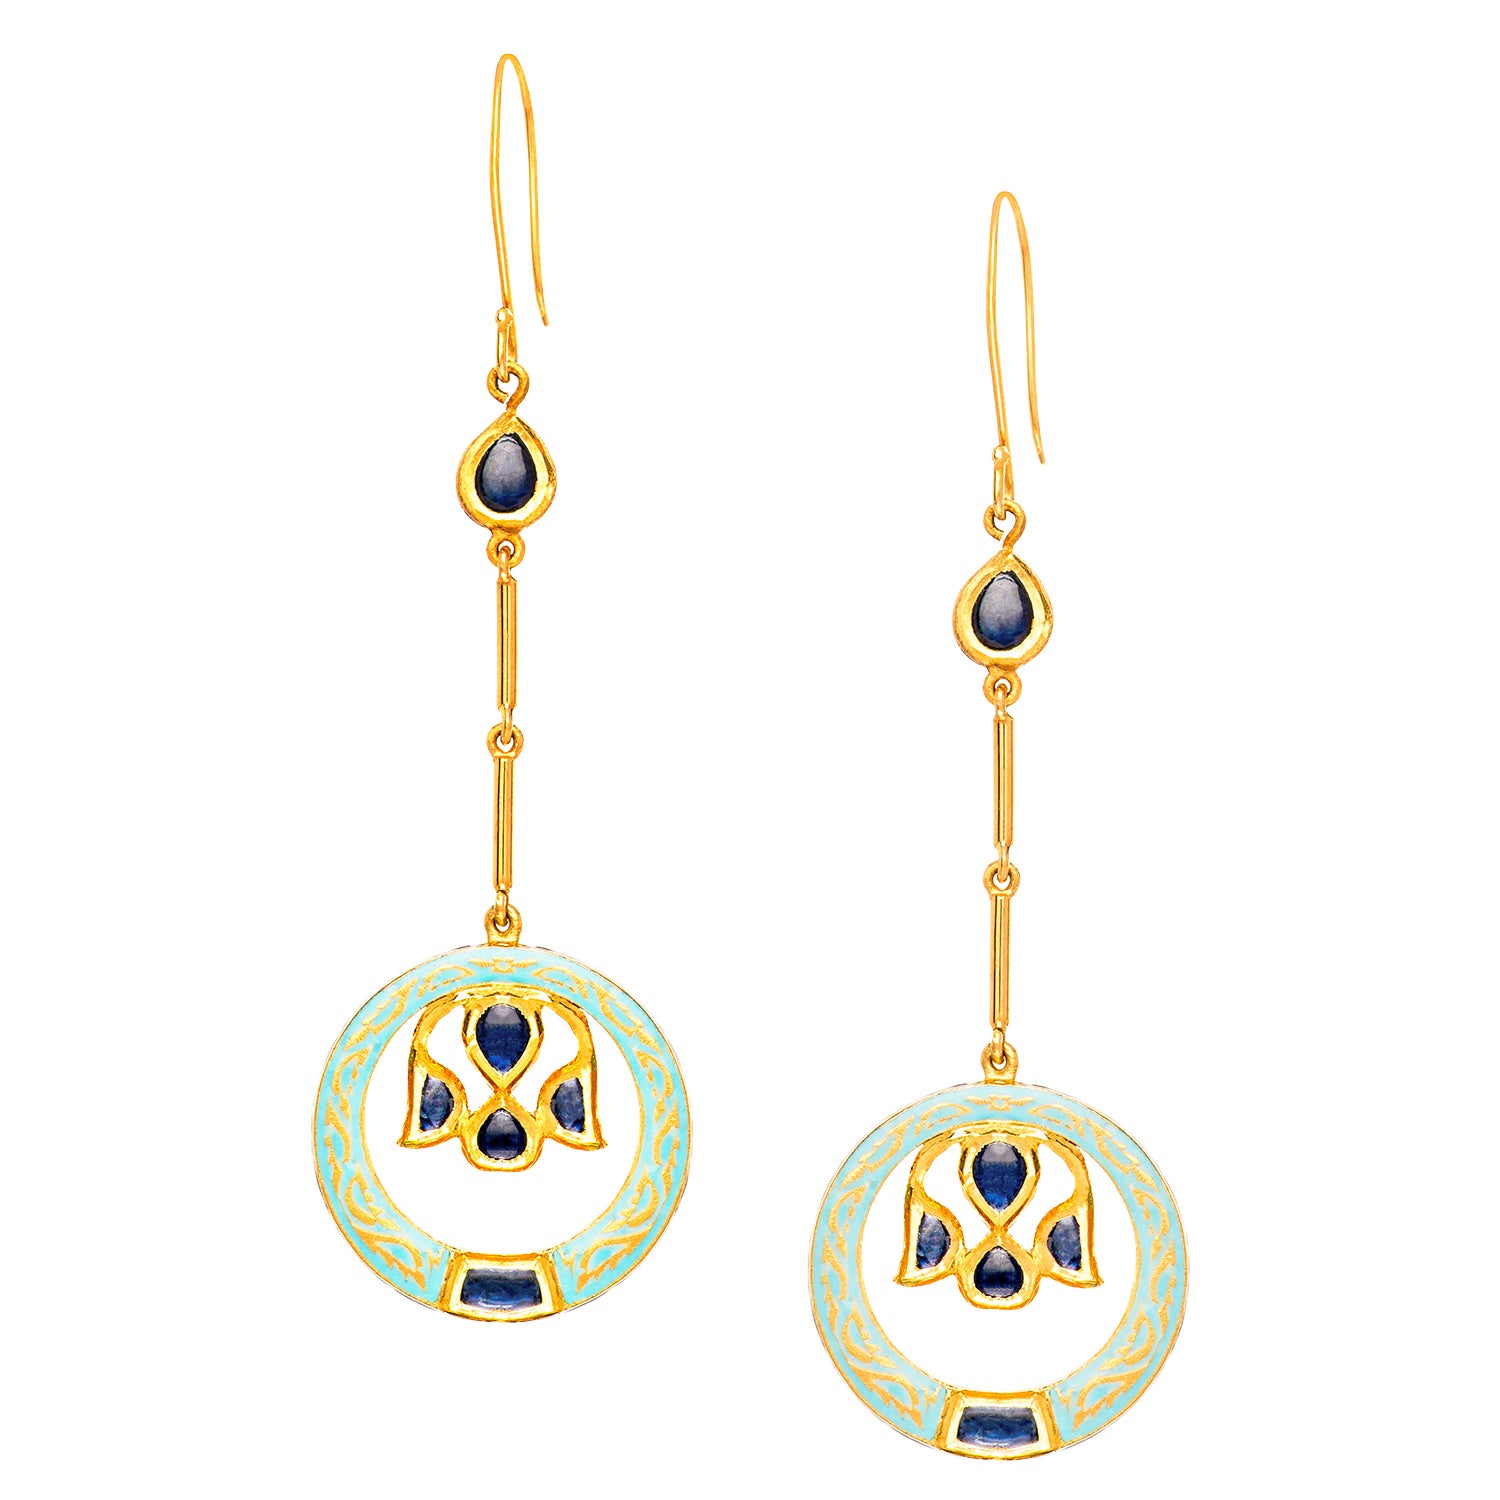 Introducing our modern interpretation of the traditional Chand Bali earrings—the 22K Gold Handmade Sun-Moon Dangle Earrings by Agaro. These earrings pay homage to the timeless charm of Chand Balis while infusing a contemporary twist. Chand Balis